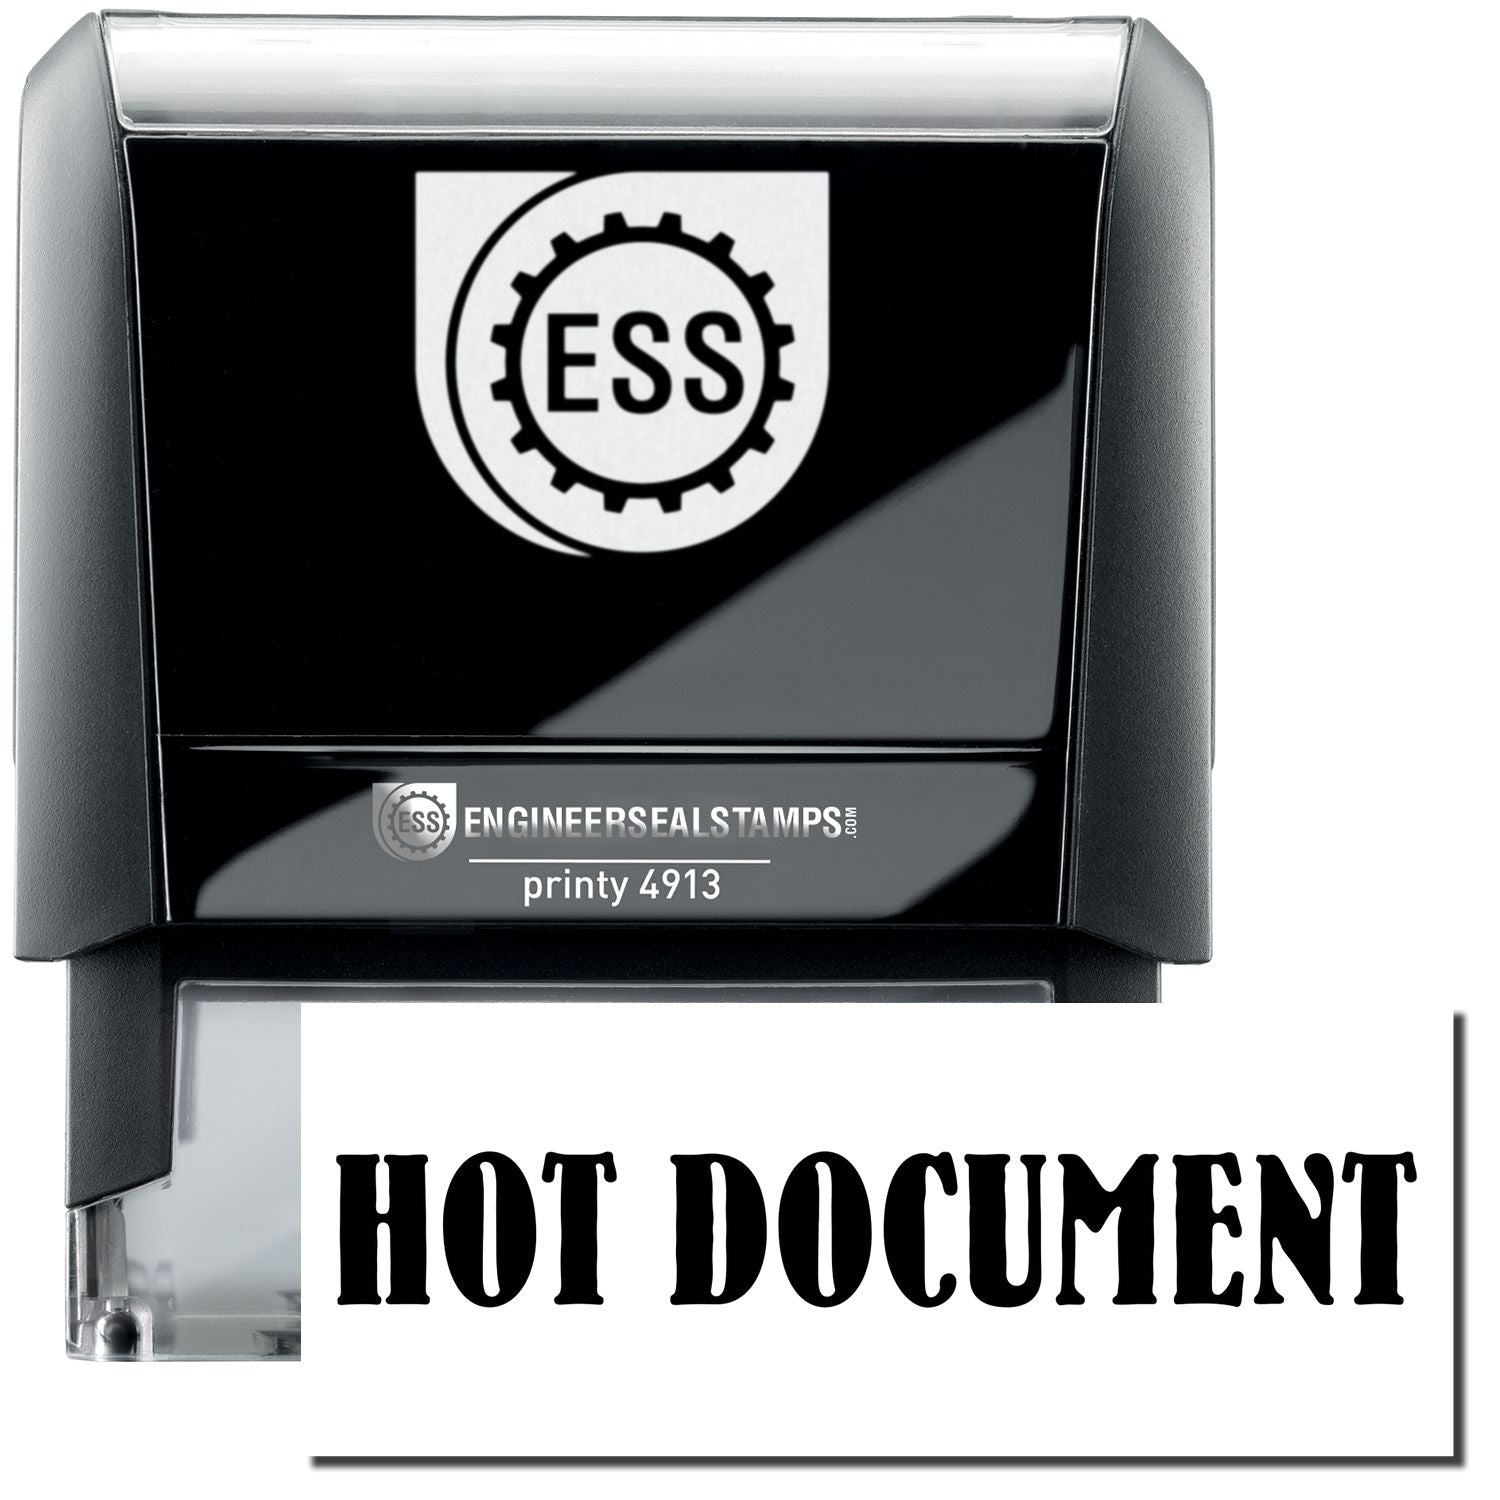 A self-inking stamp with a stamped image showing how the text "HOT DOCUMENT" in a large bold font is displayed by it.